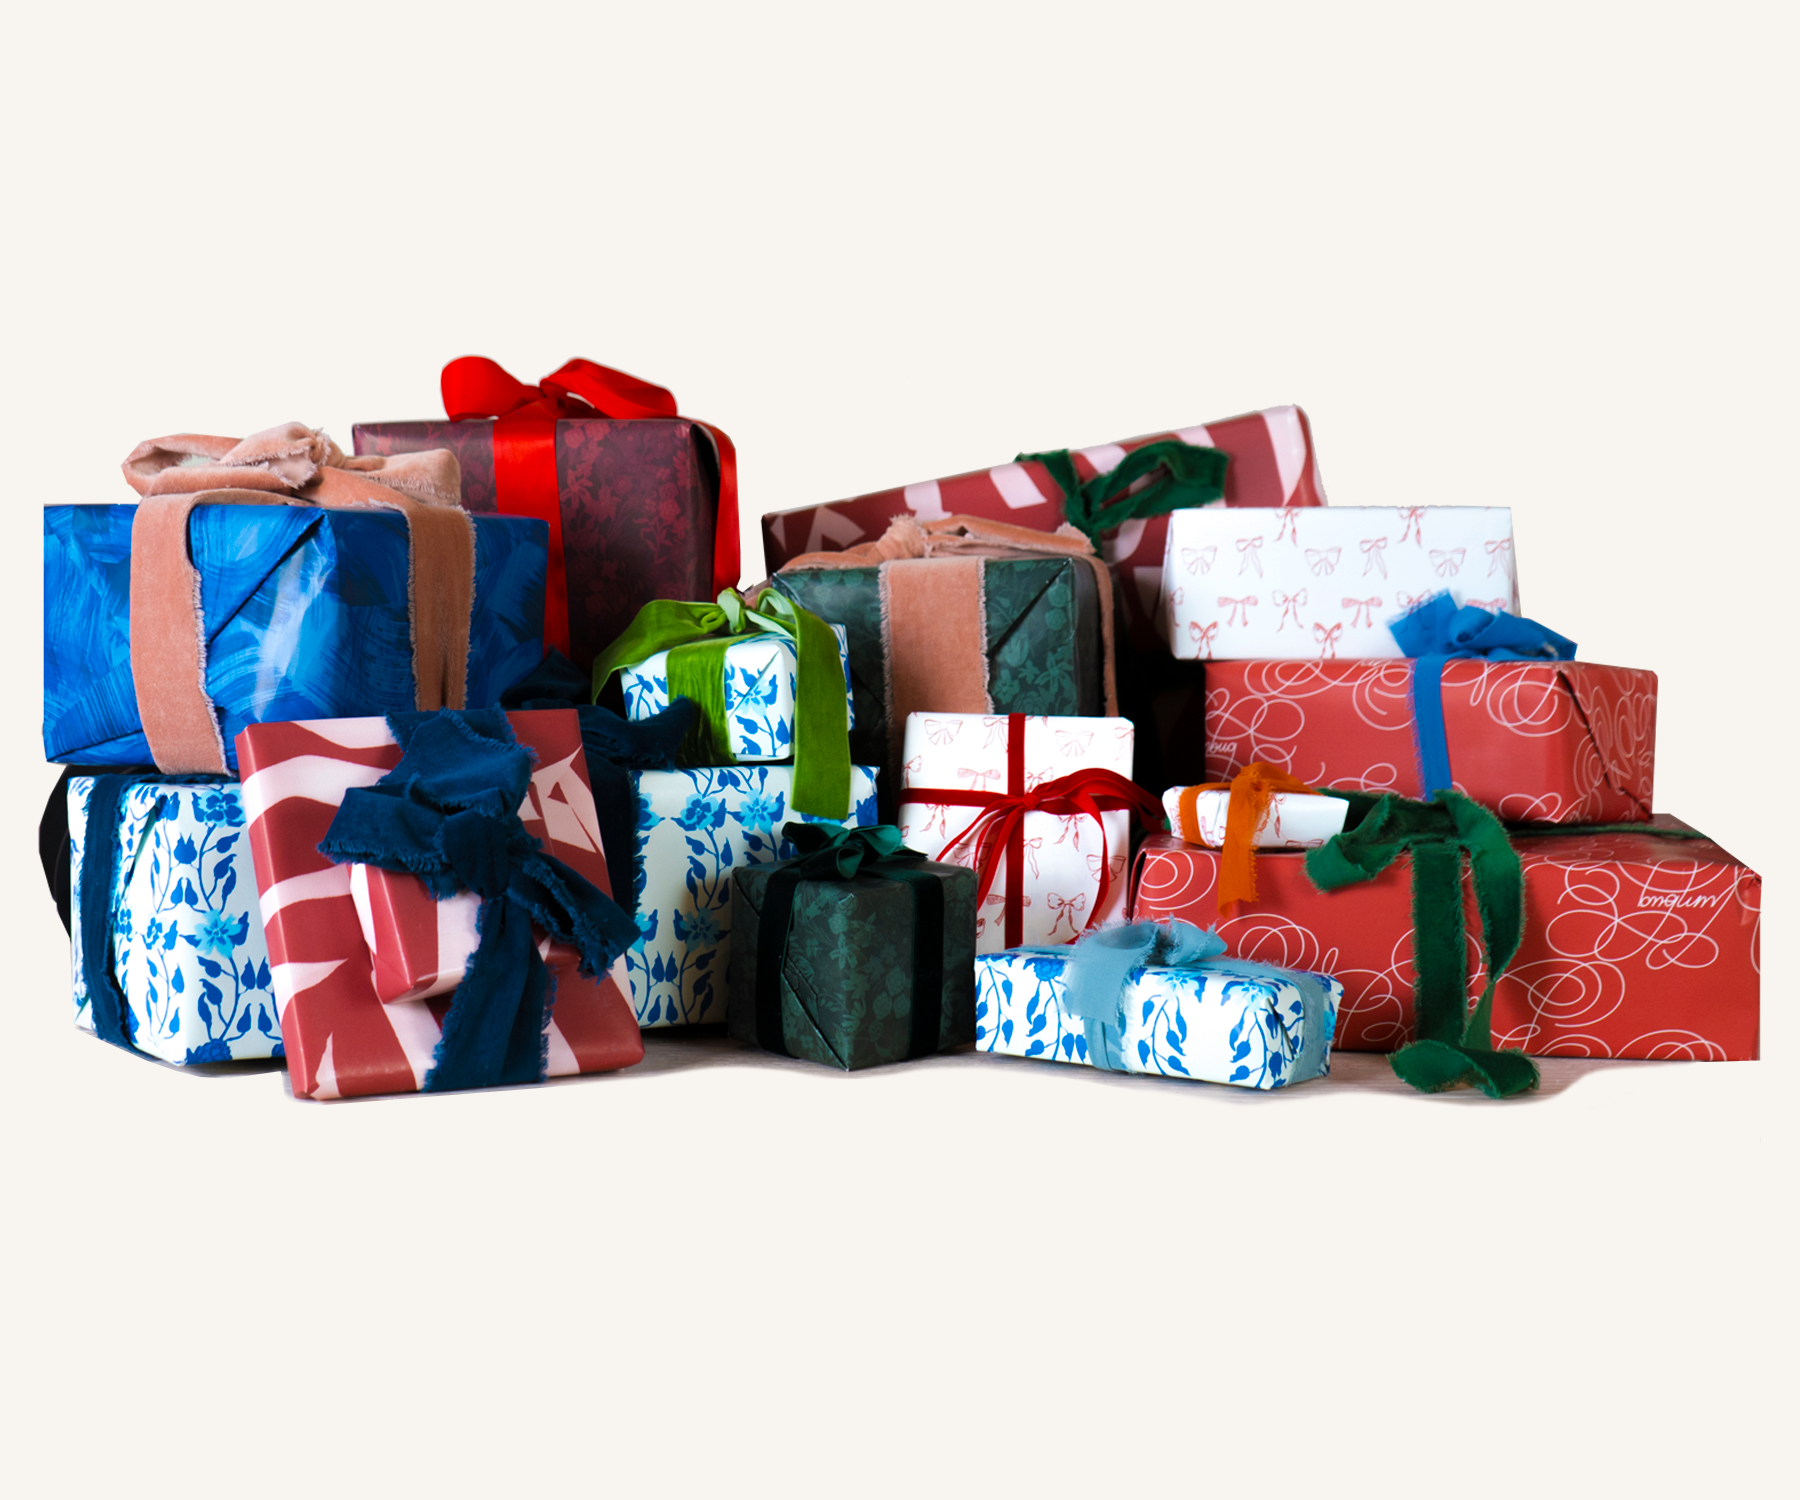 Tiny Red Bows - Wrapping Paper – Flat Vernacular